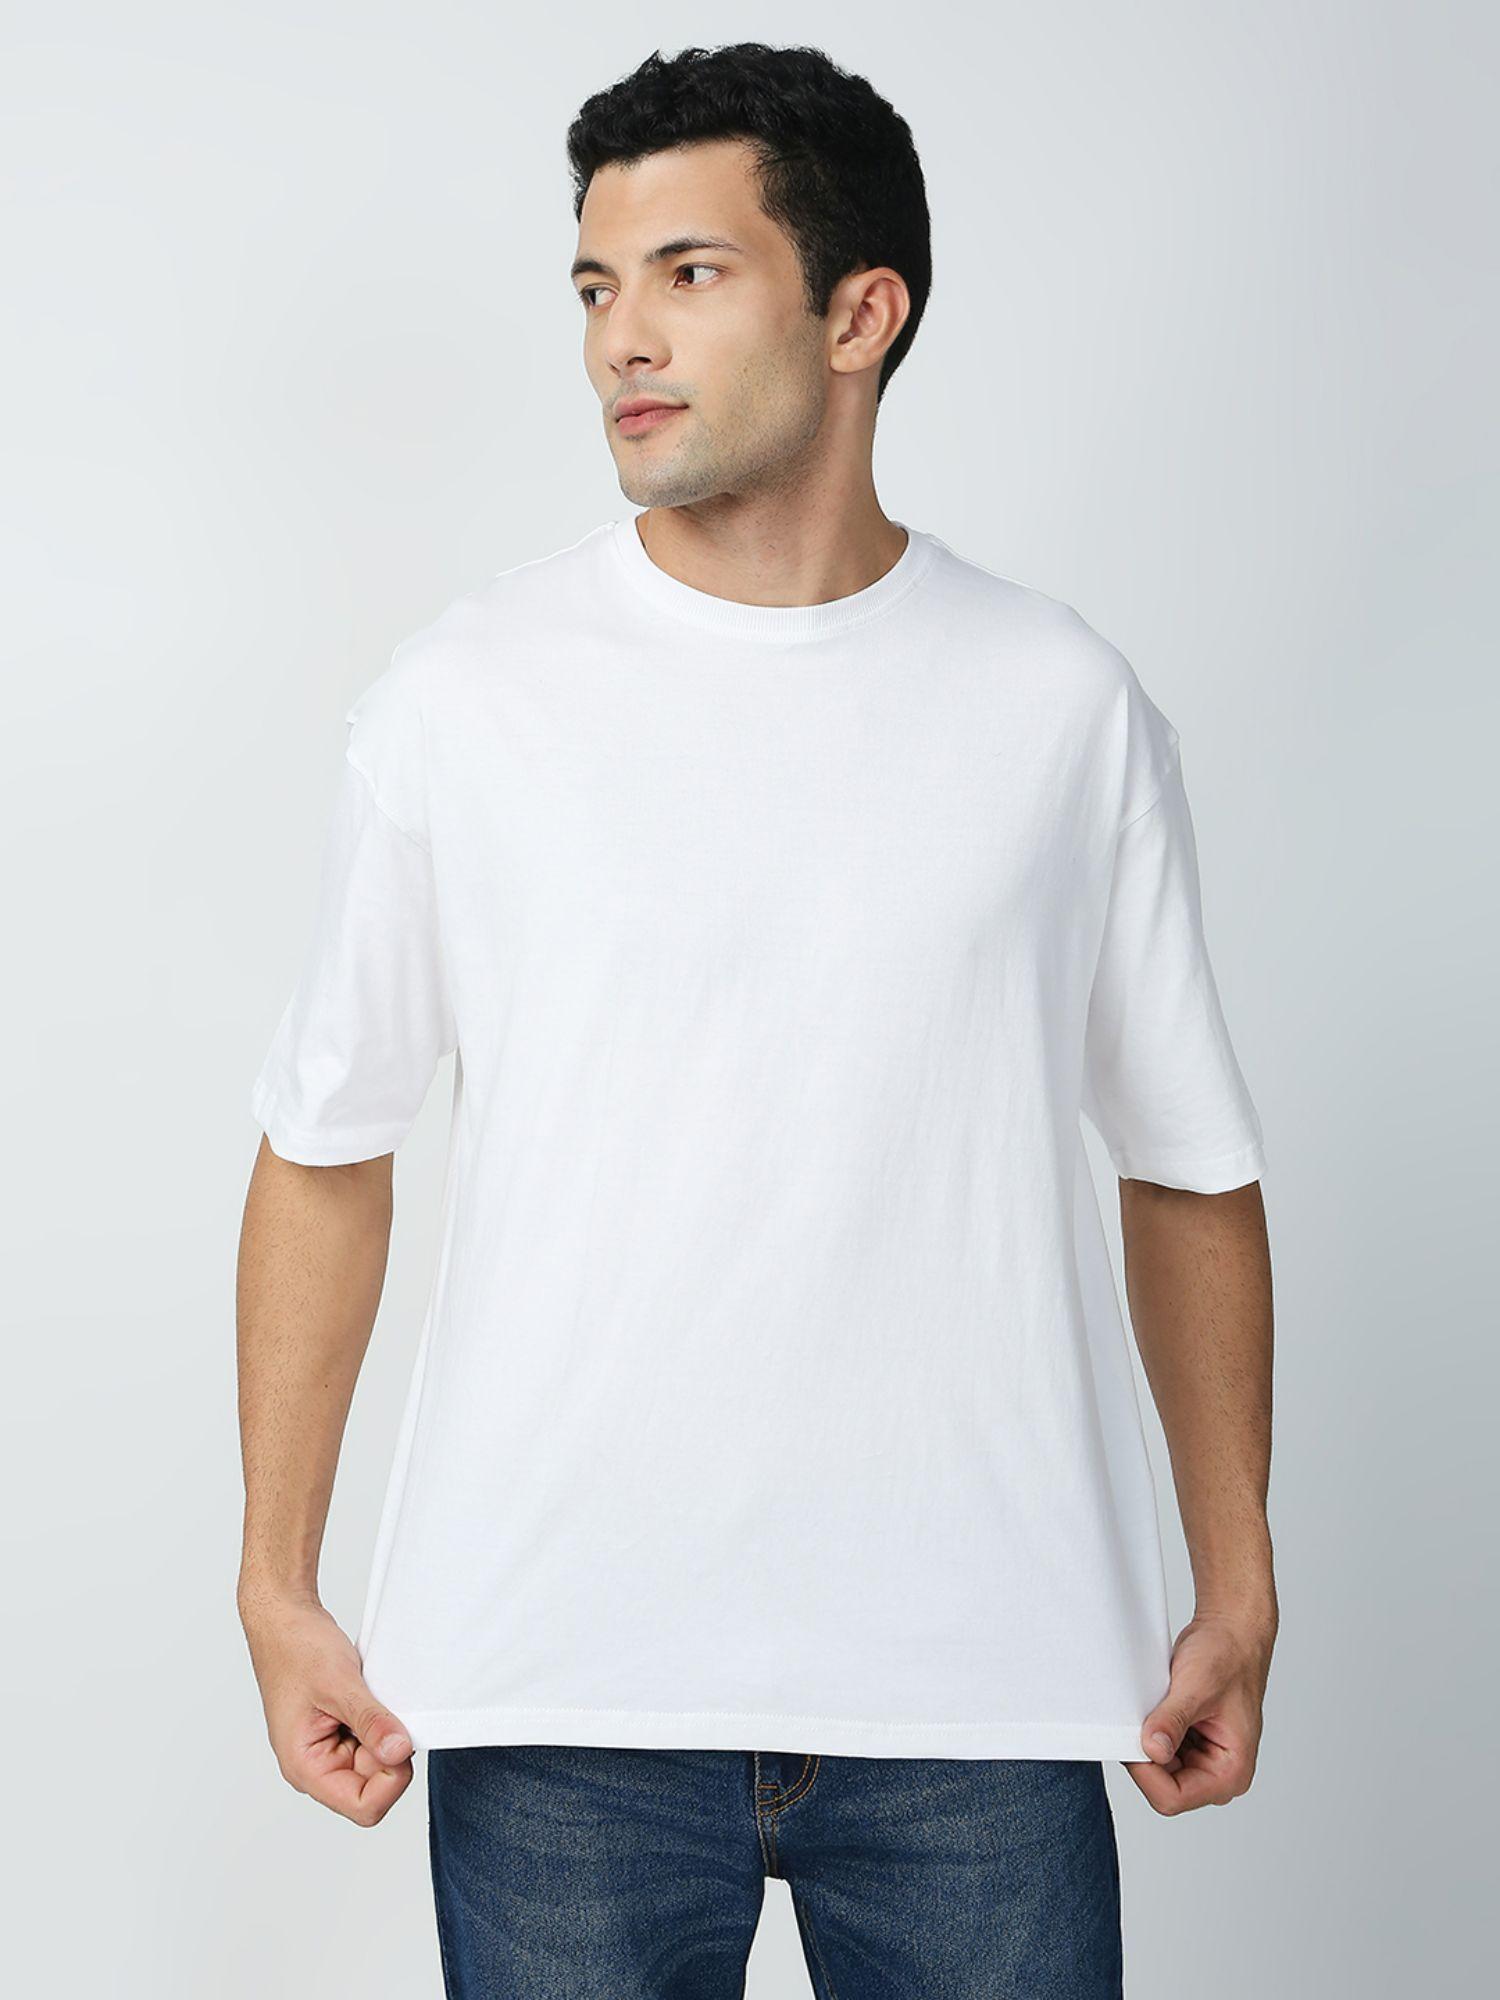 mens stylish baggy white color back printed round neck t-shirt